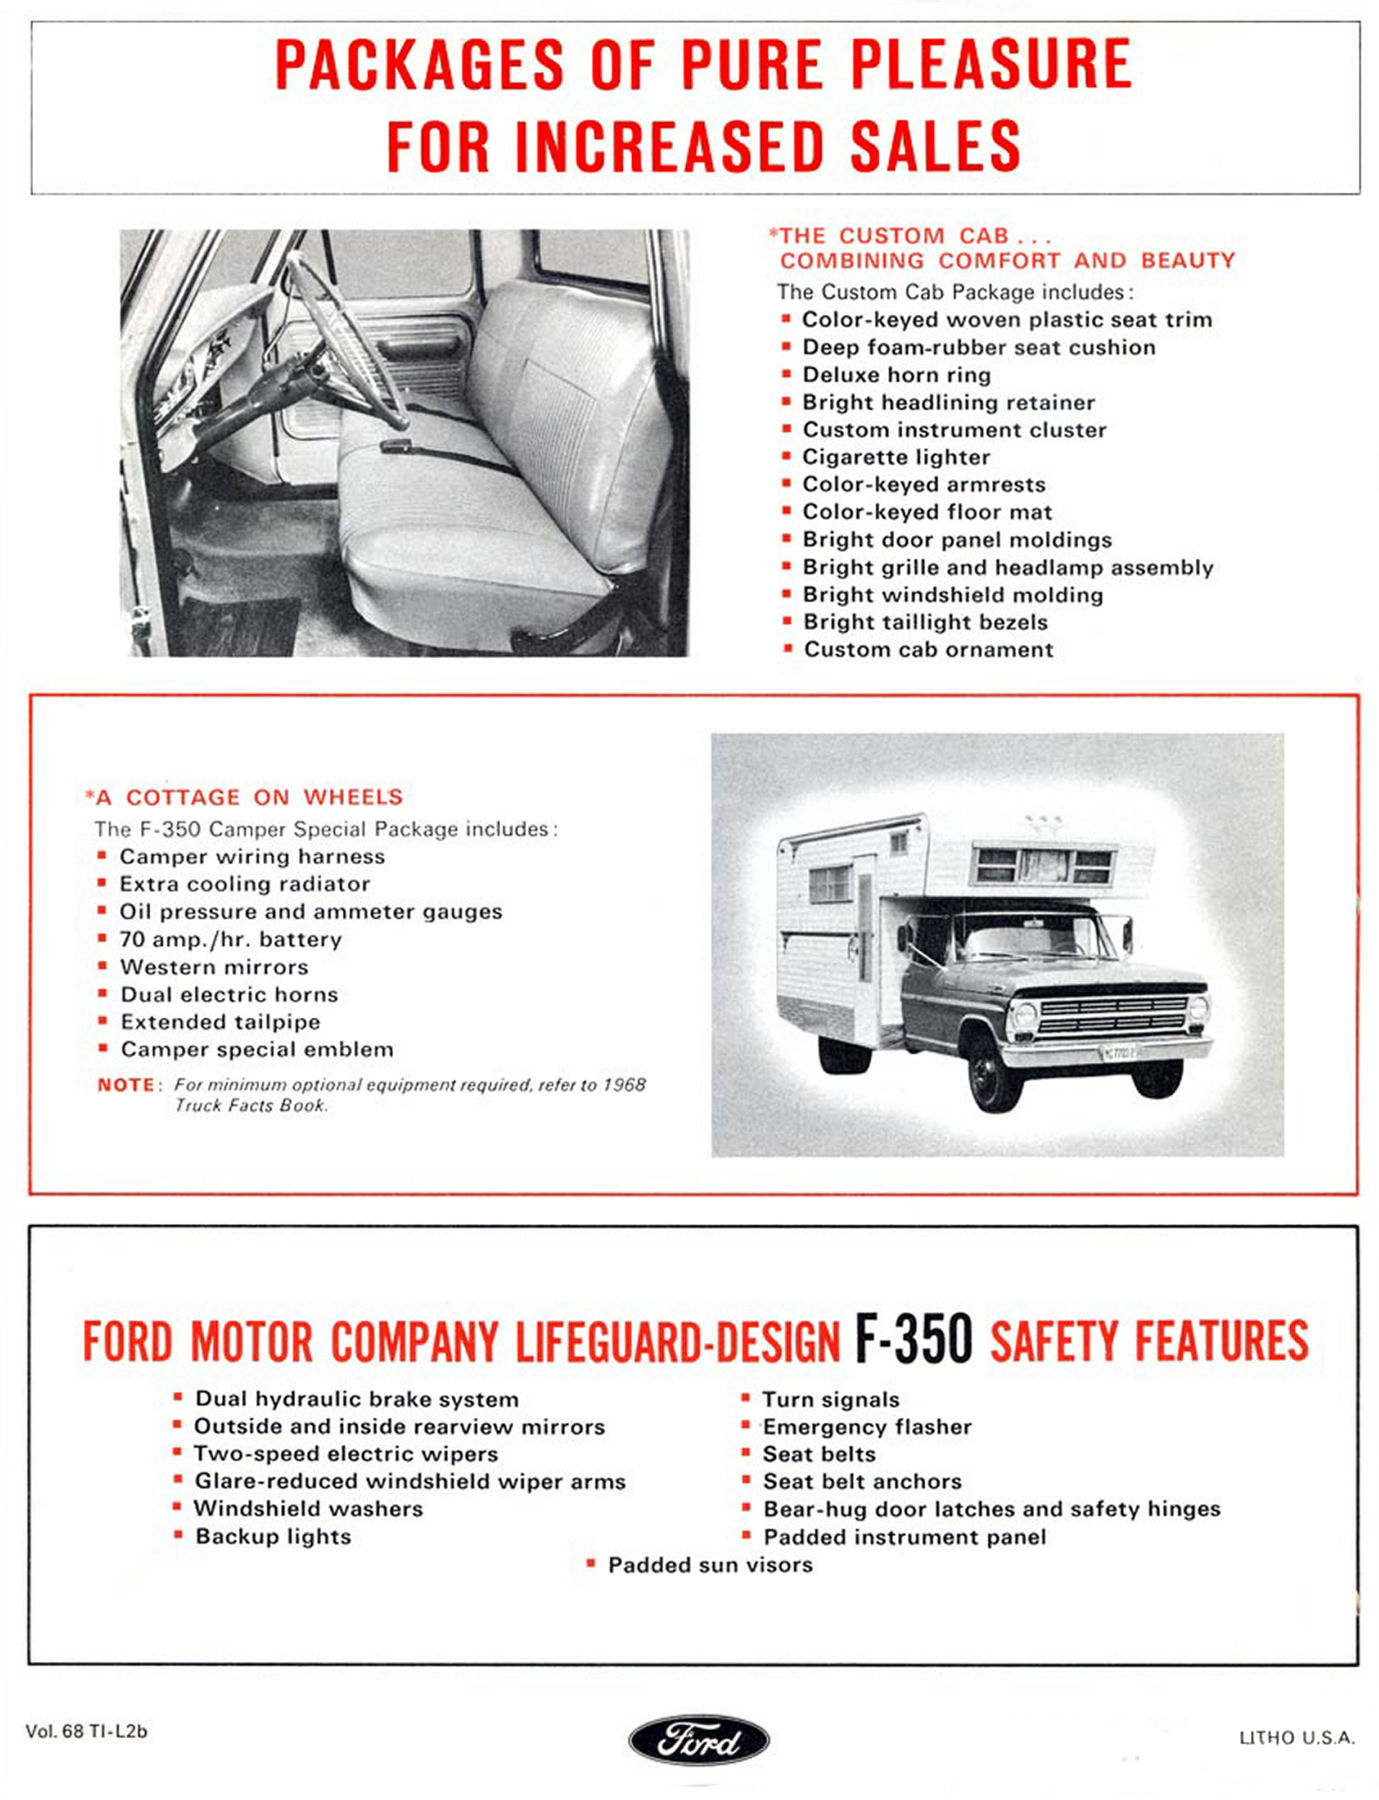 1968 Ford F-350 Sales Features-04